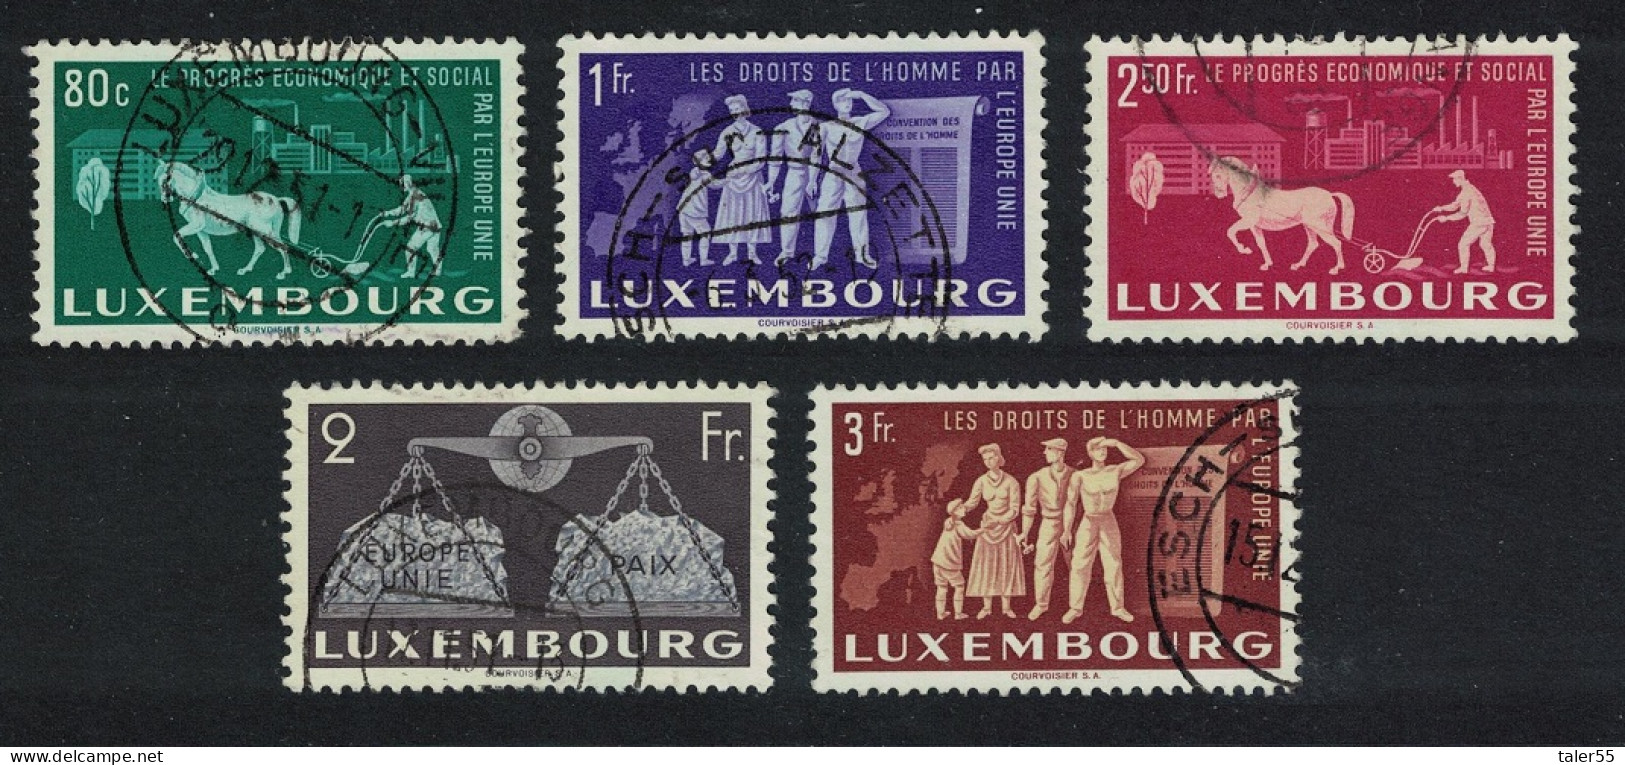 Luxembourg To Promote United Europe 5v 1951 Canc SG#543-547 MI#478-482 - Used Stamps